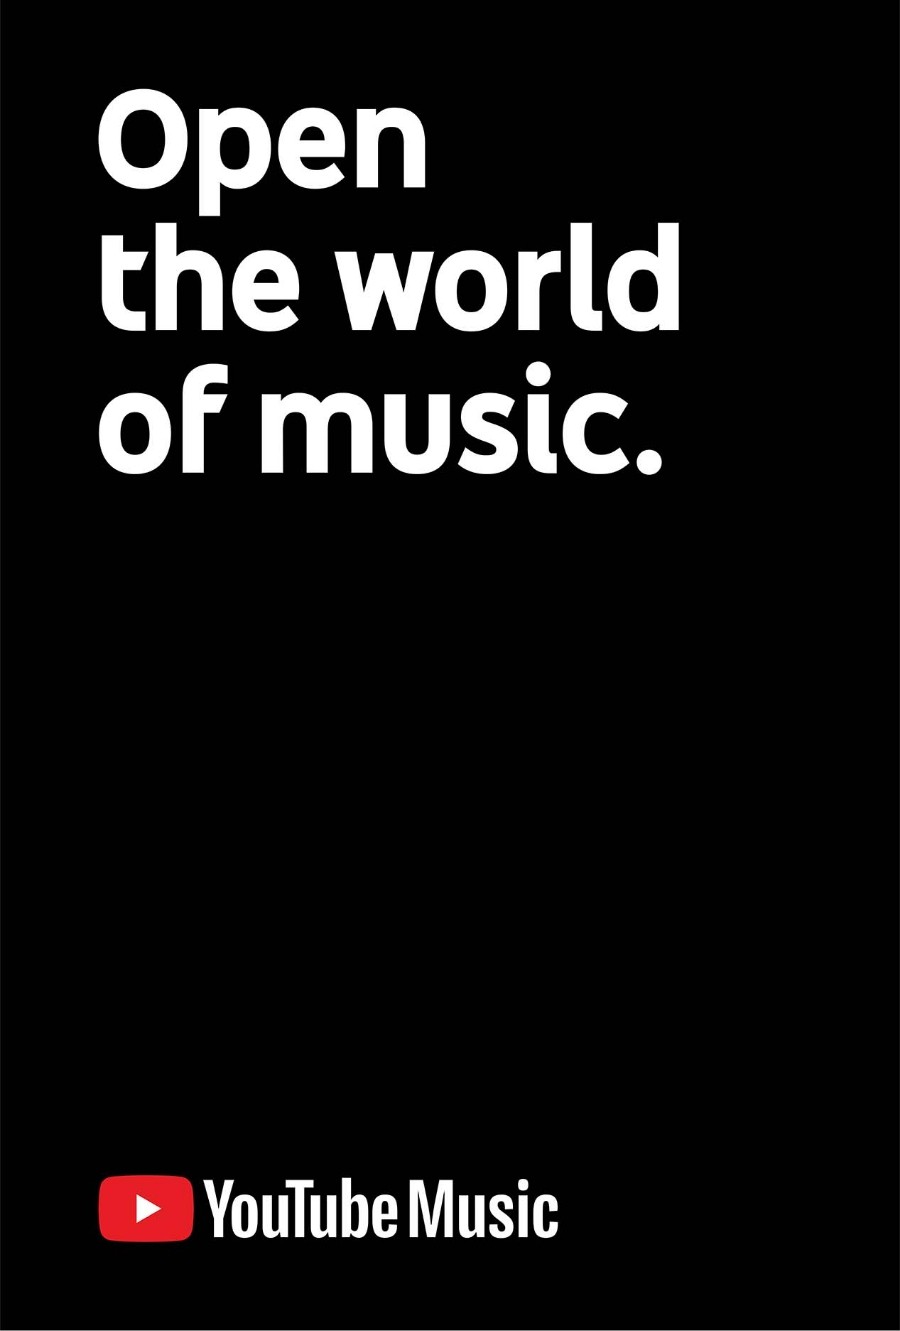 Open the world of music. YouTube Music